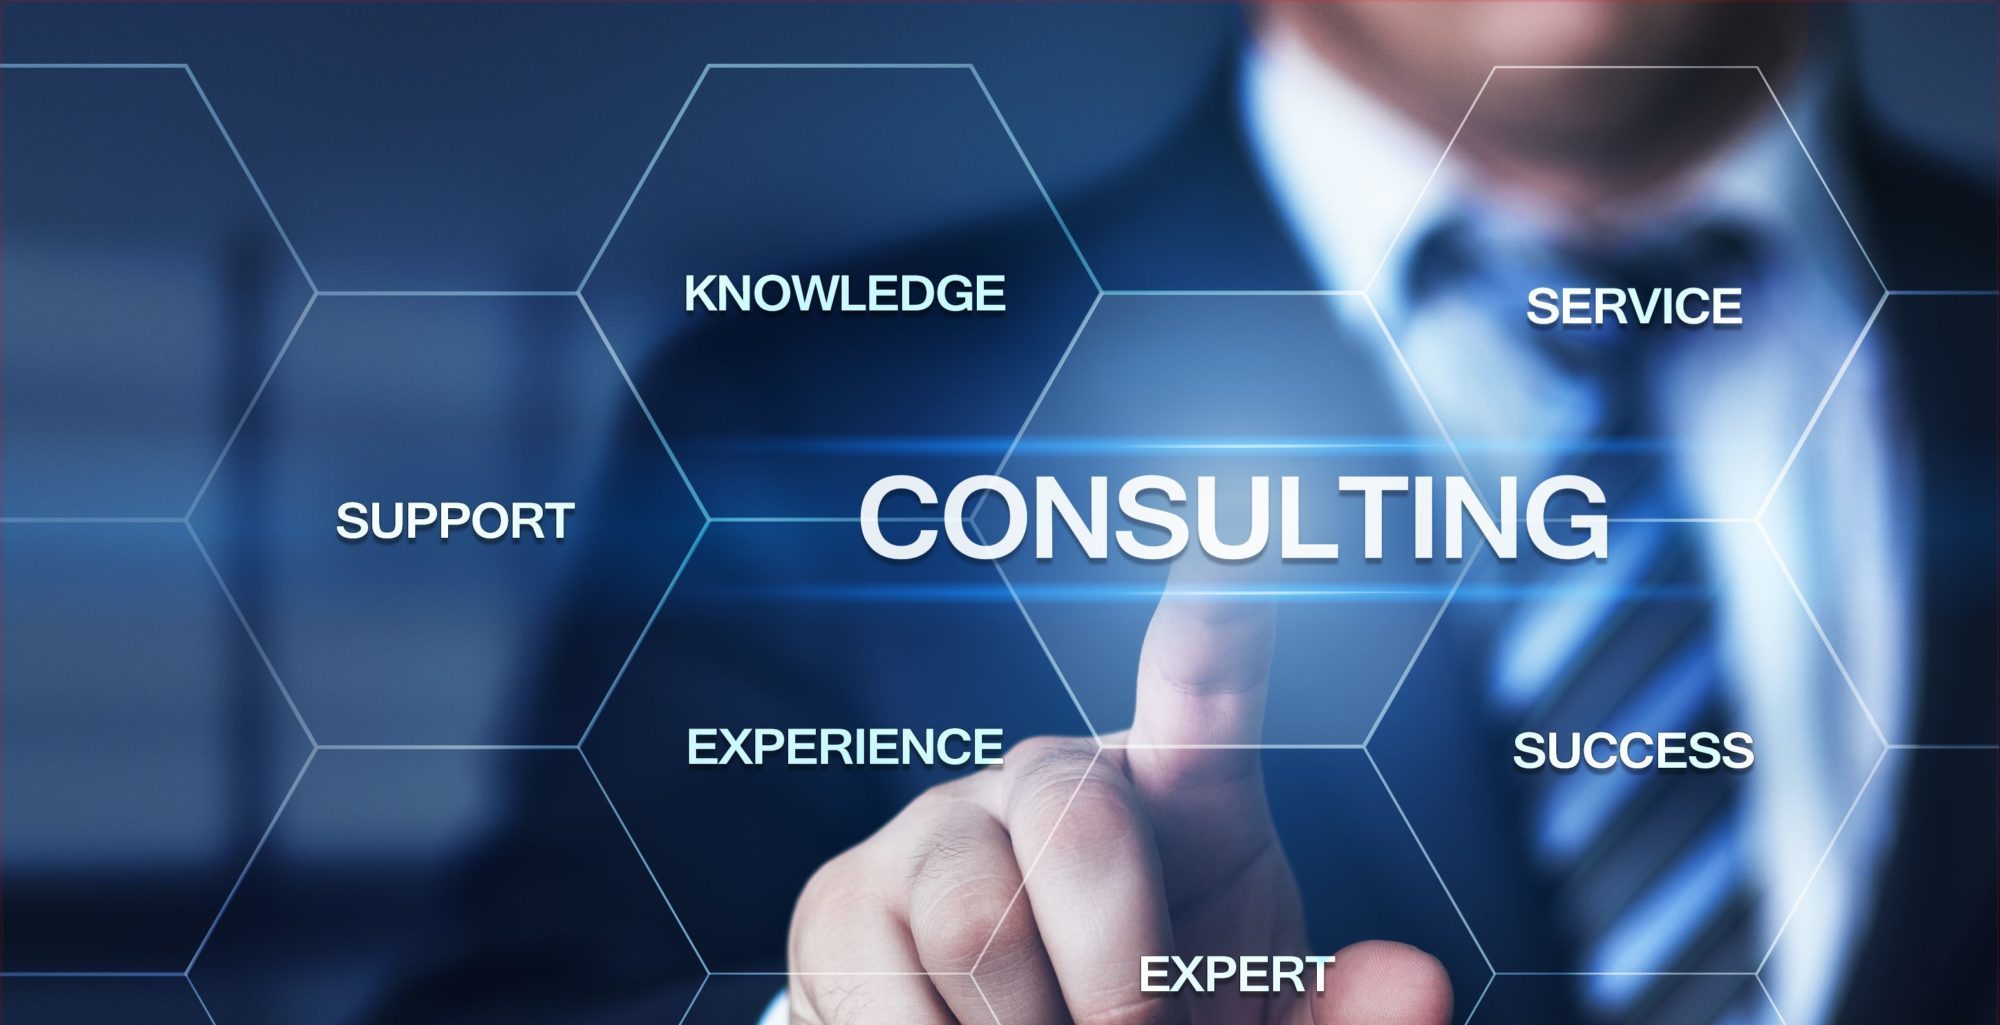 Consulting service